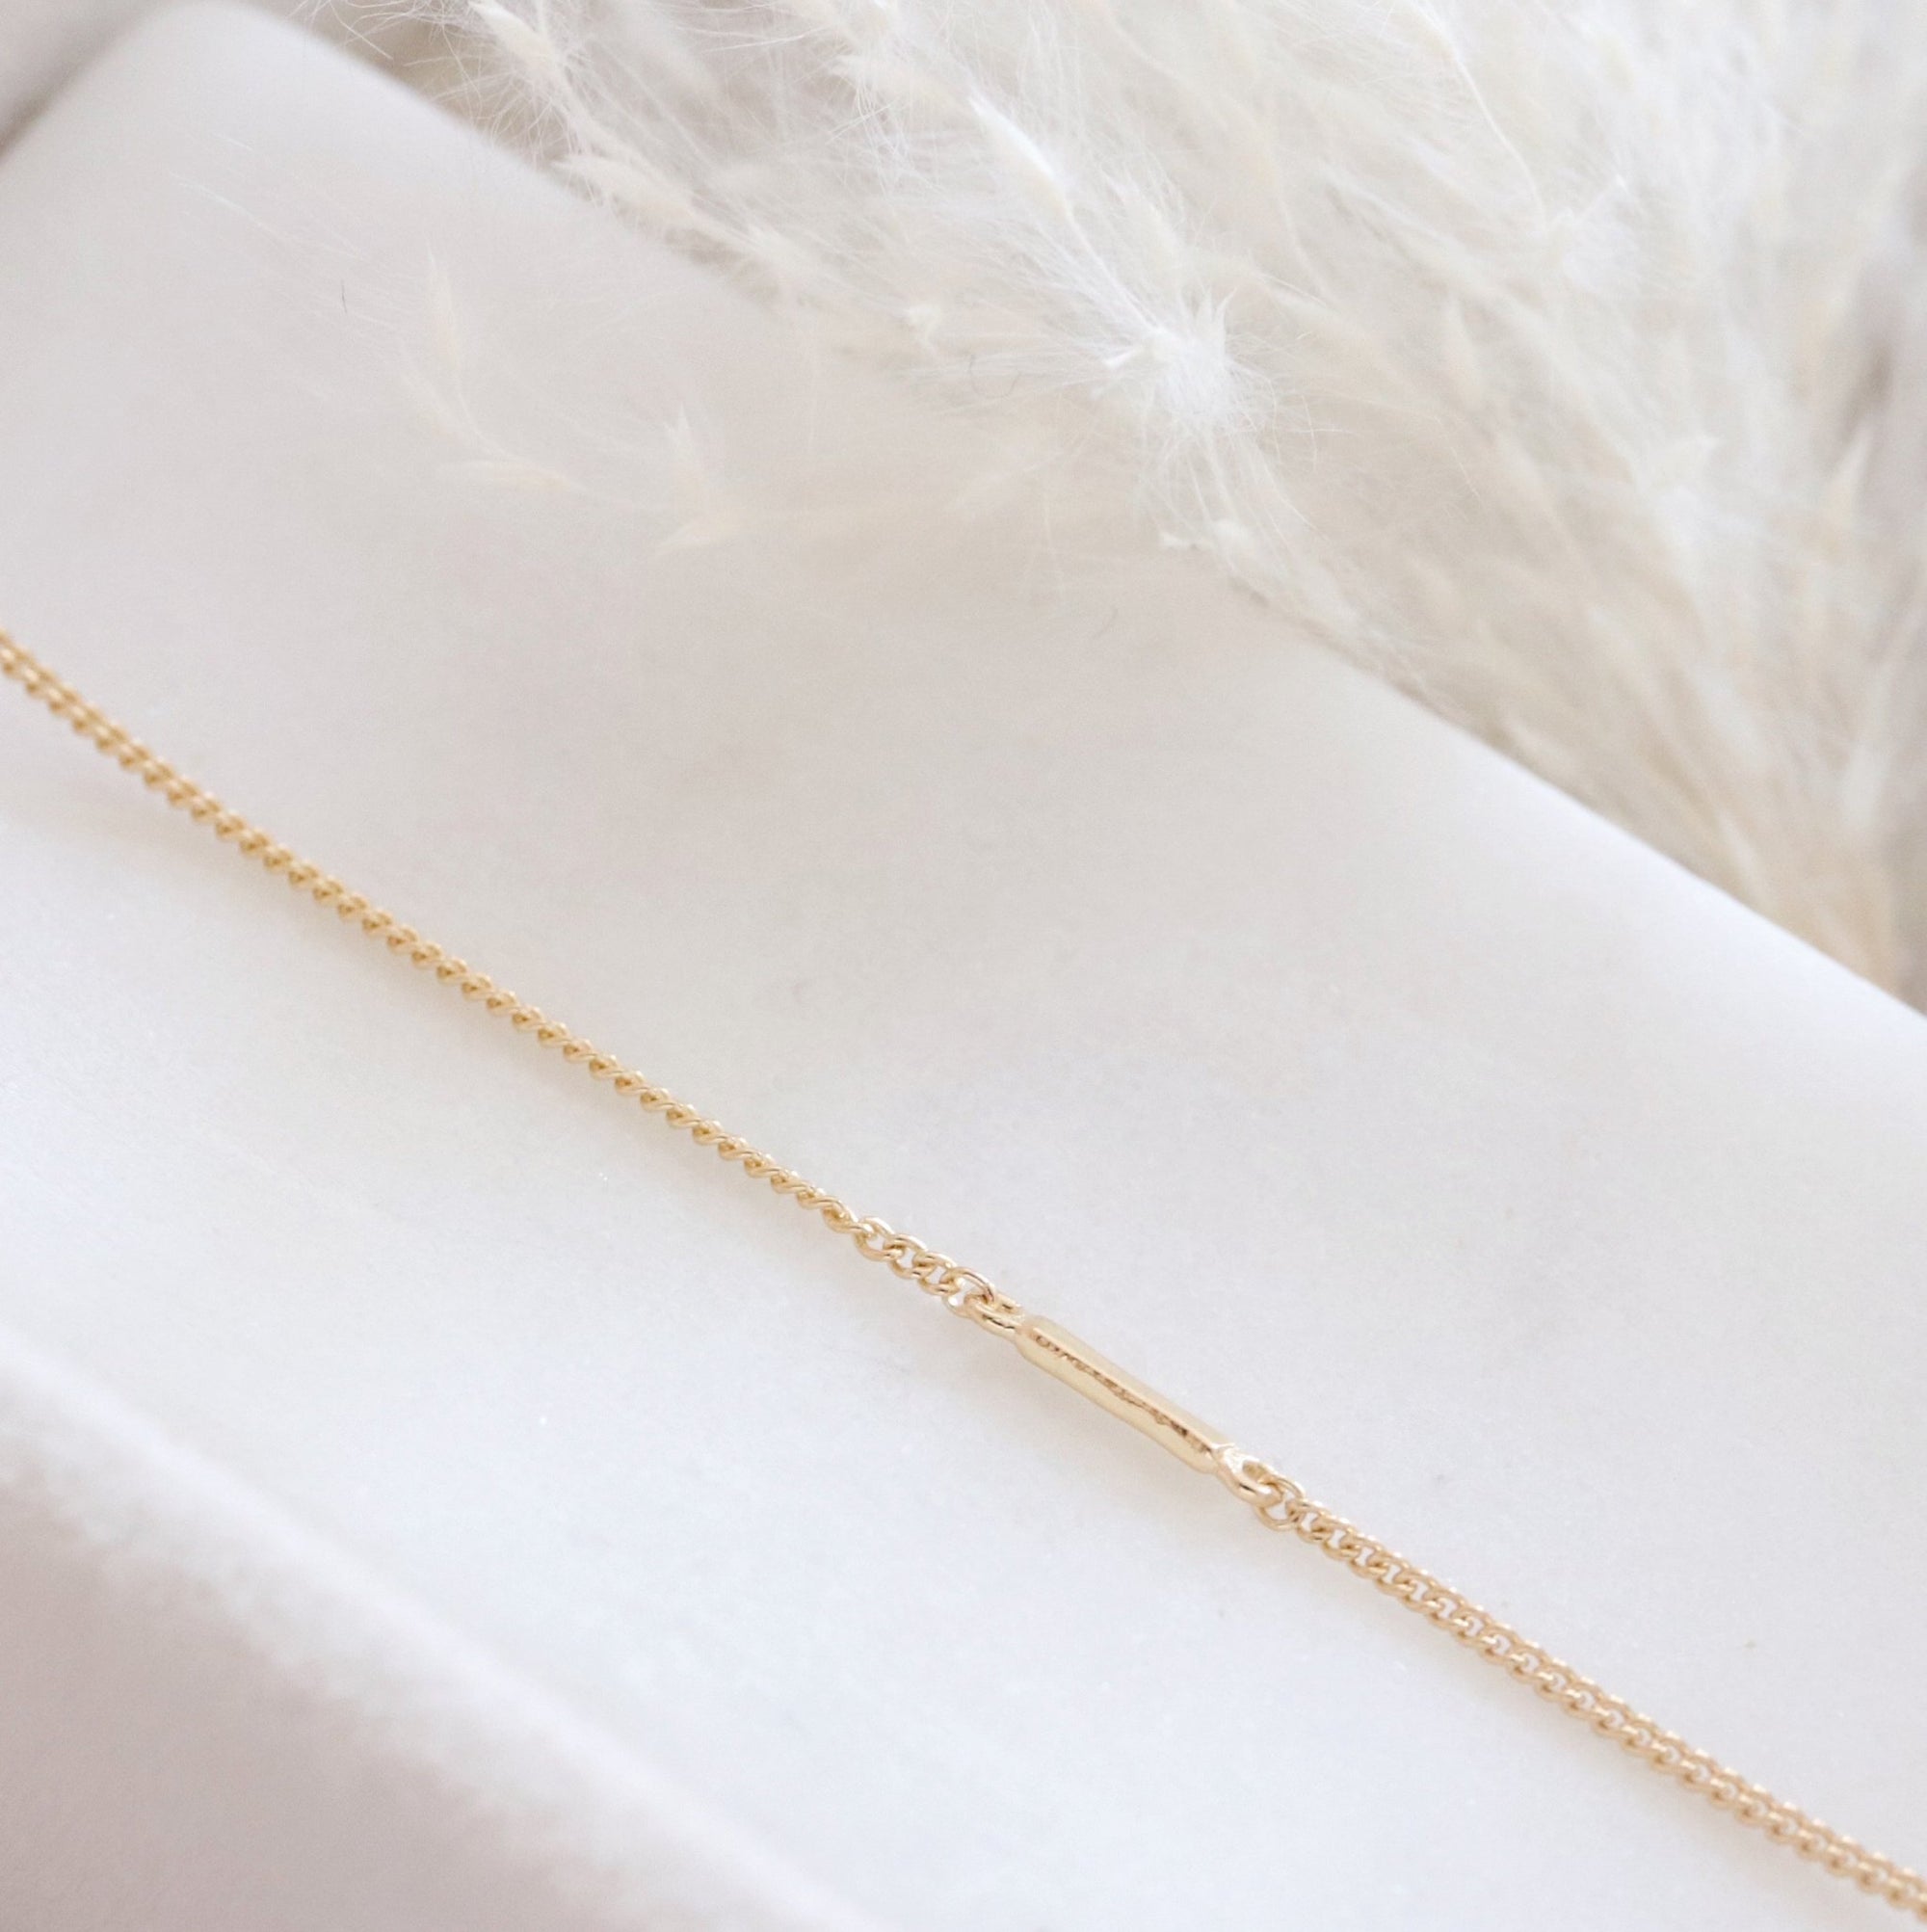 NOTABLE OFFSET INITIAL NECKLACE - I - GOLD - SO PRETTY CARA COTTER